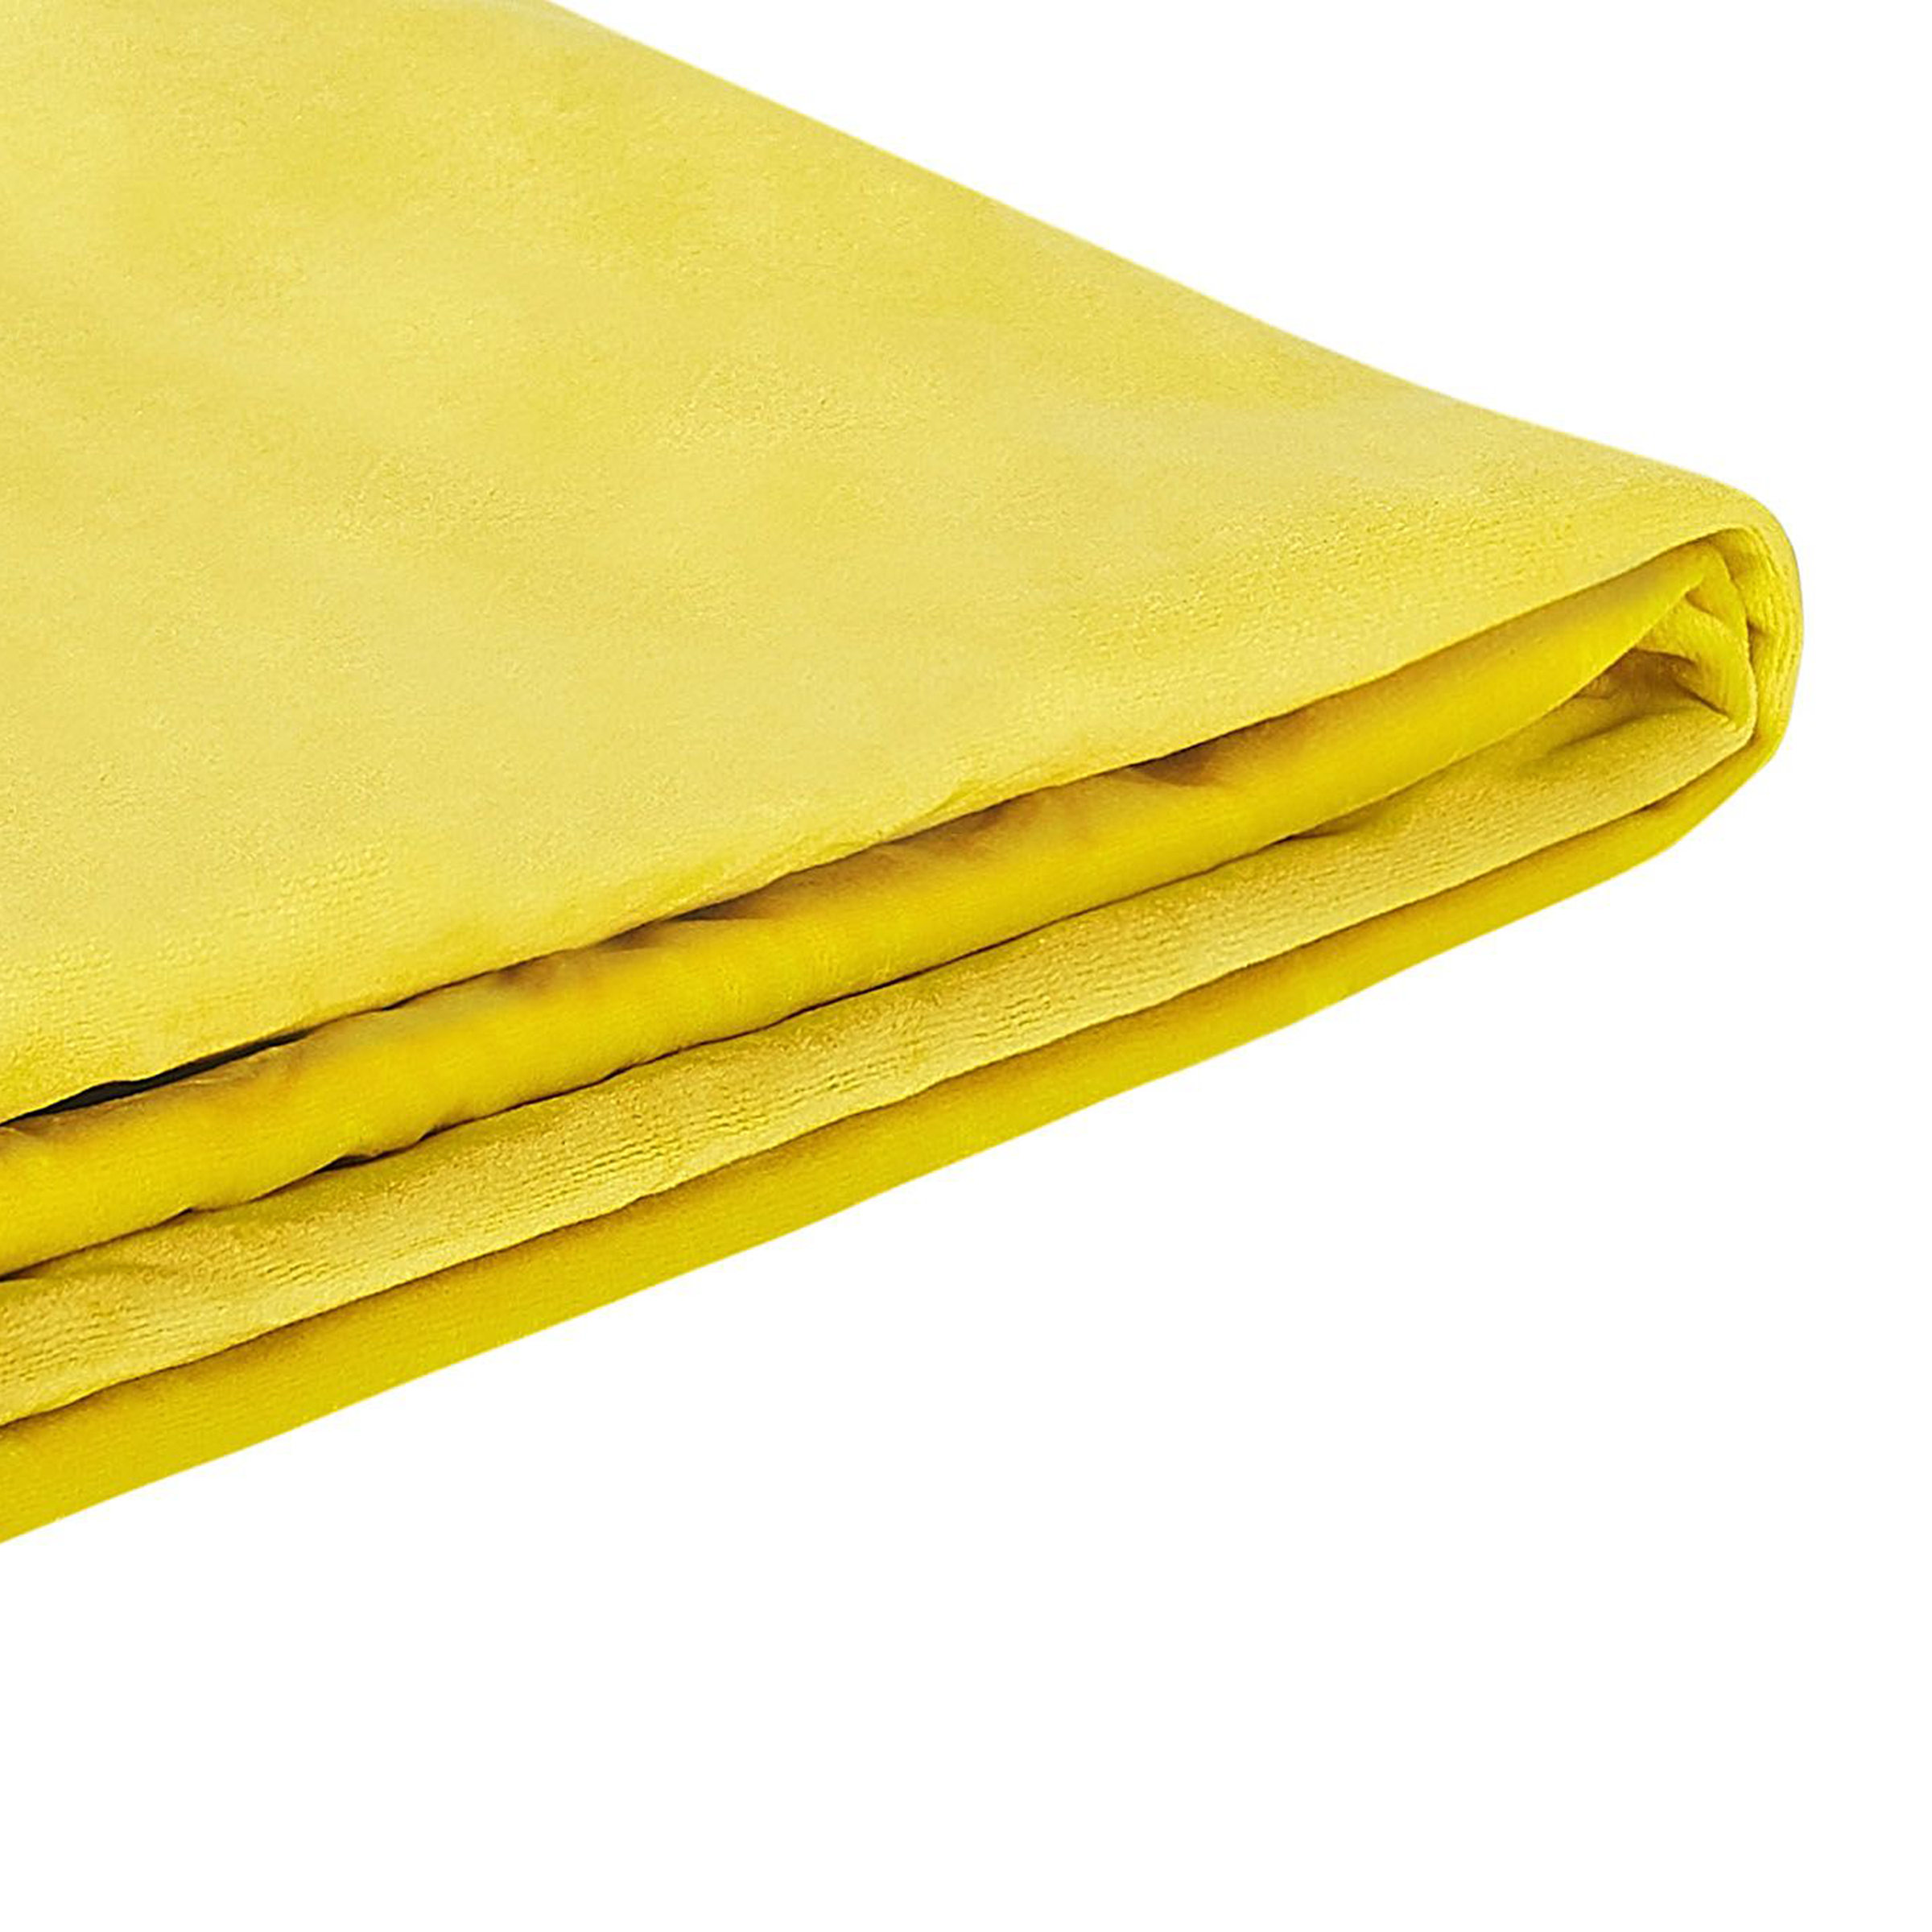 Beliani Bed Frame Cover Yellow Velvet for Bed 160 x 200 cm Removable Washable